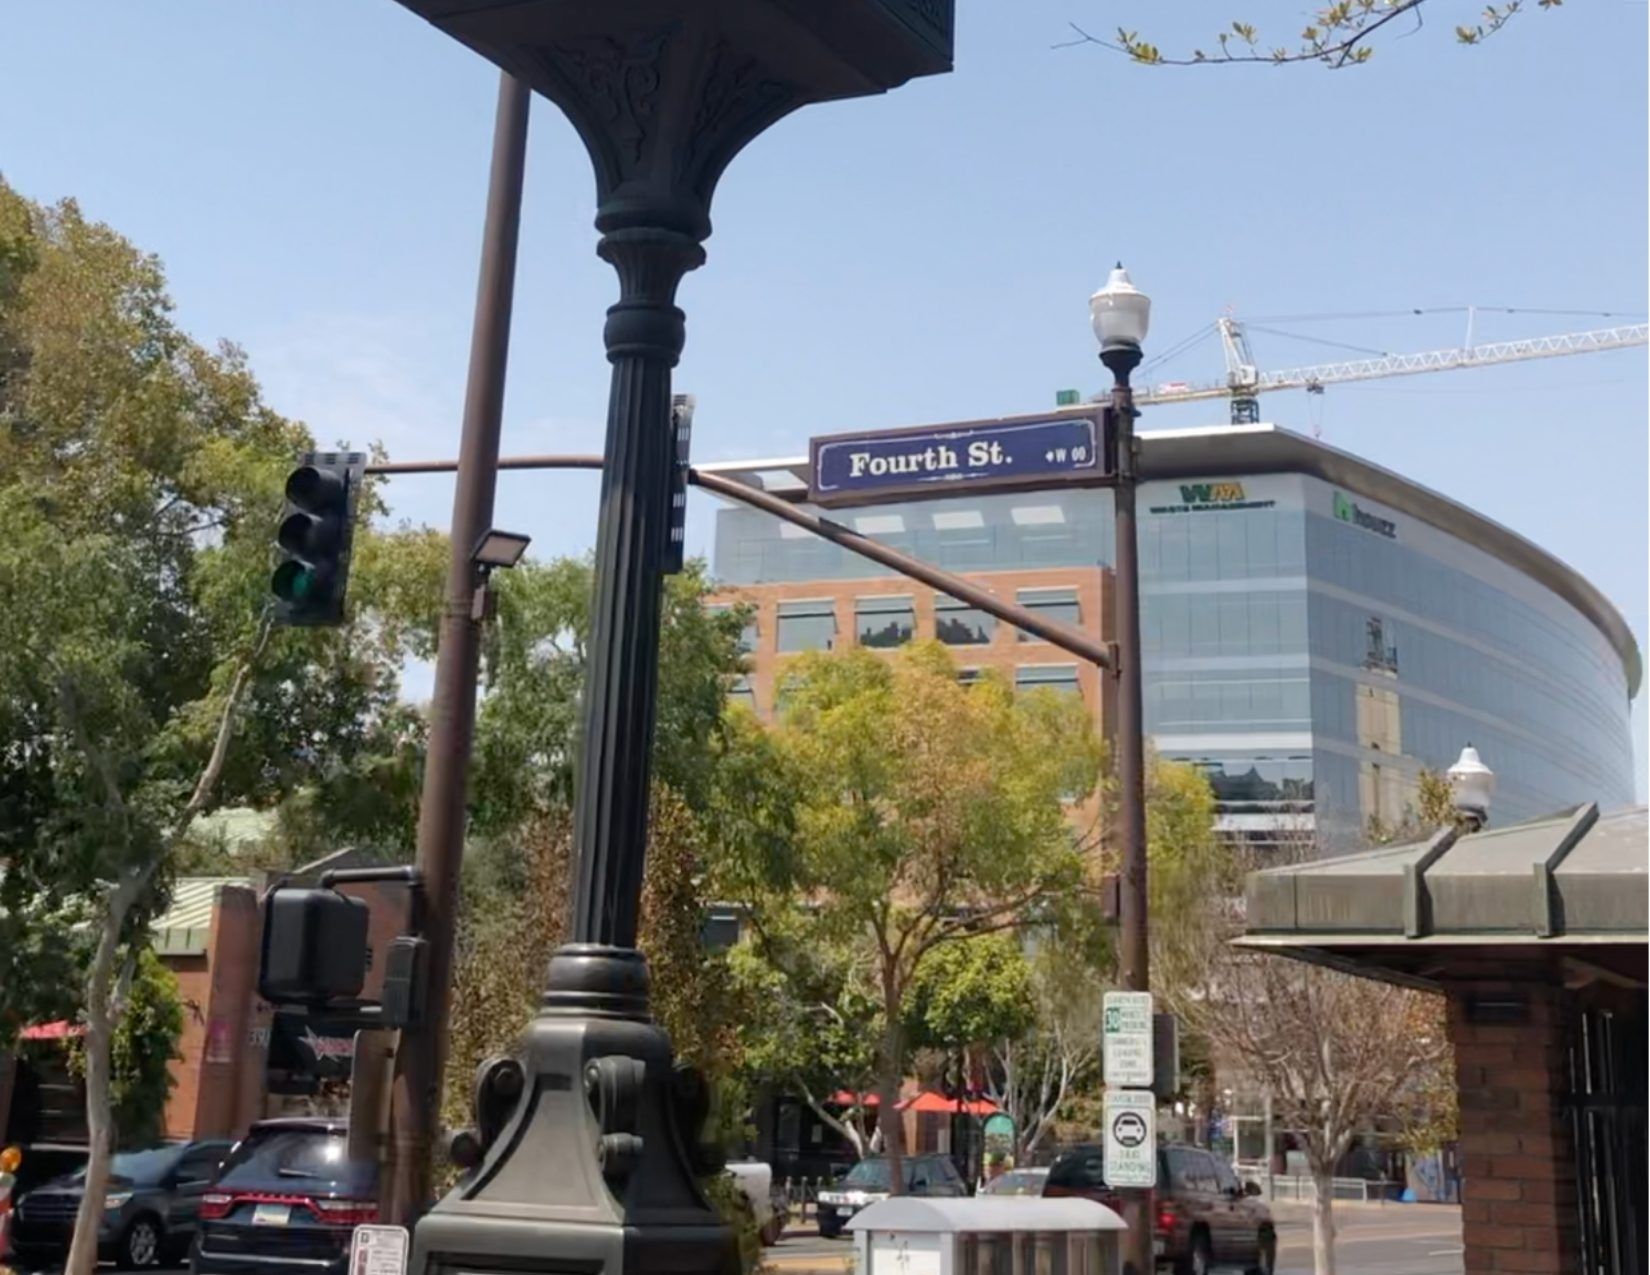 Fourth Street sign on Mill Avenue in Tempe Arizona